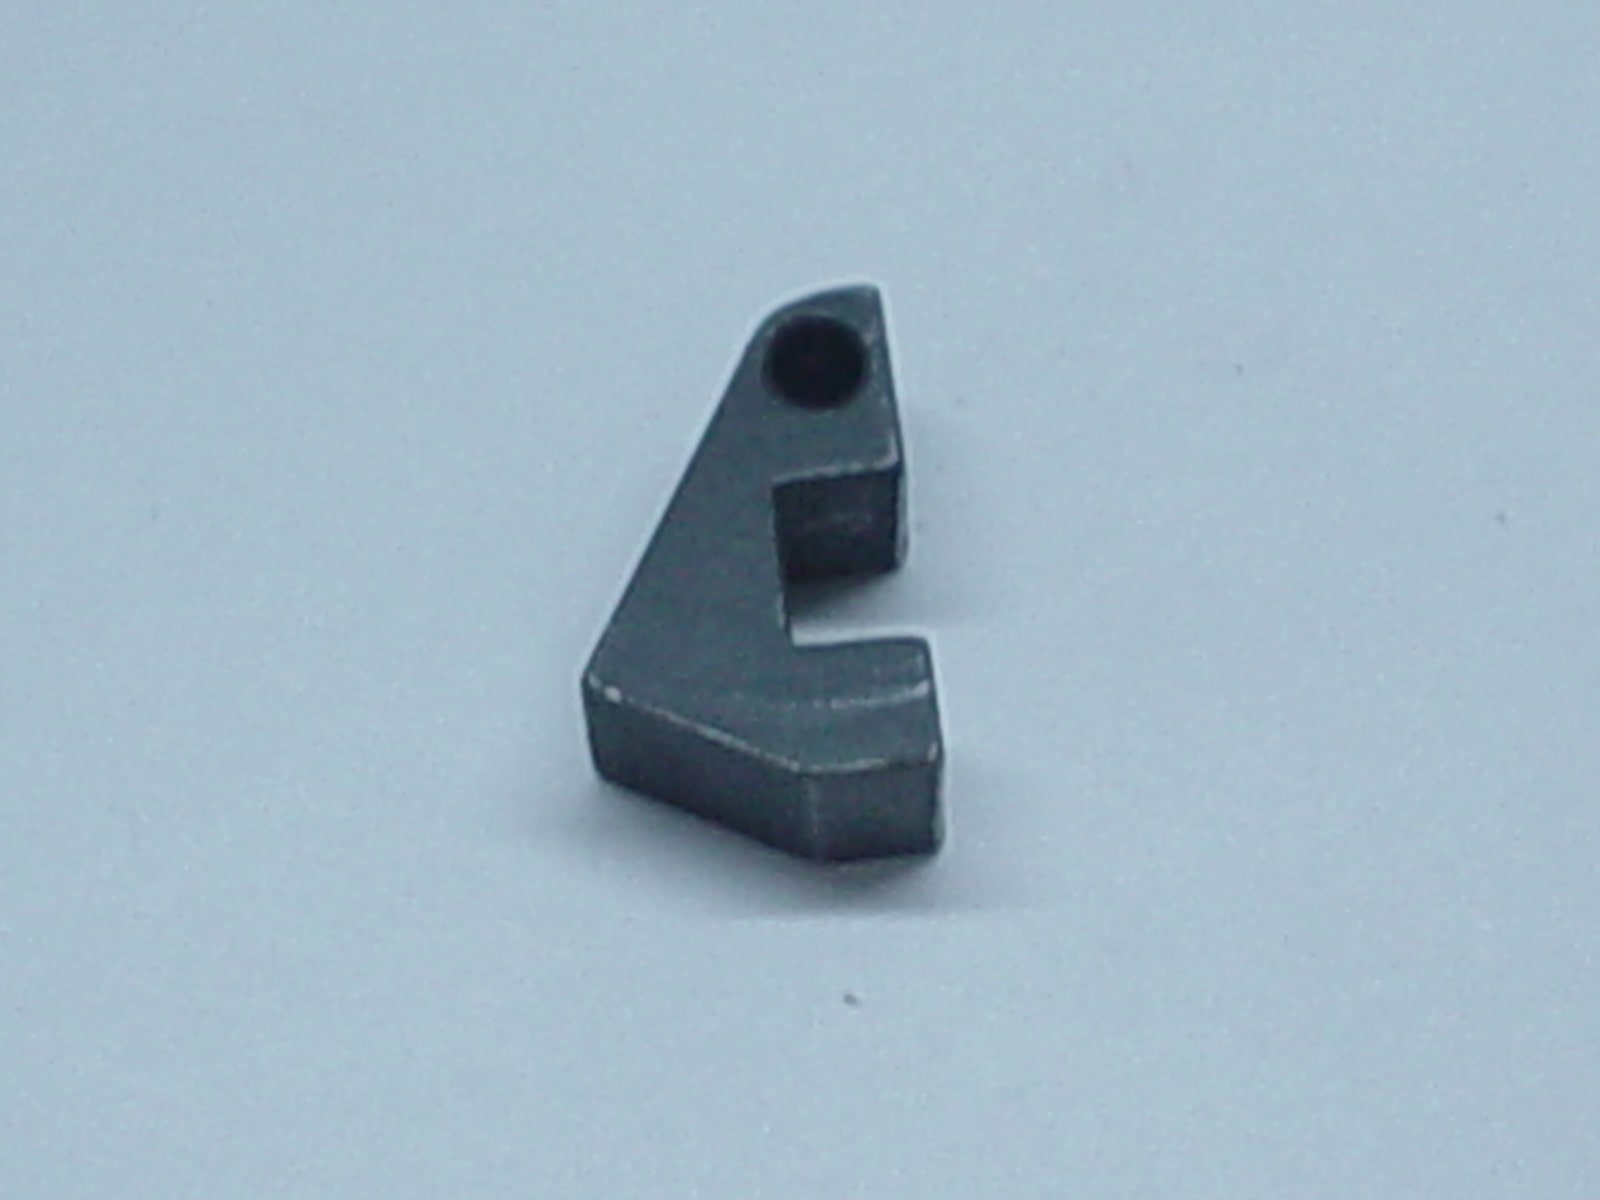 Indexer Latch